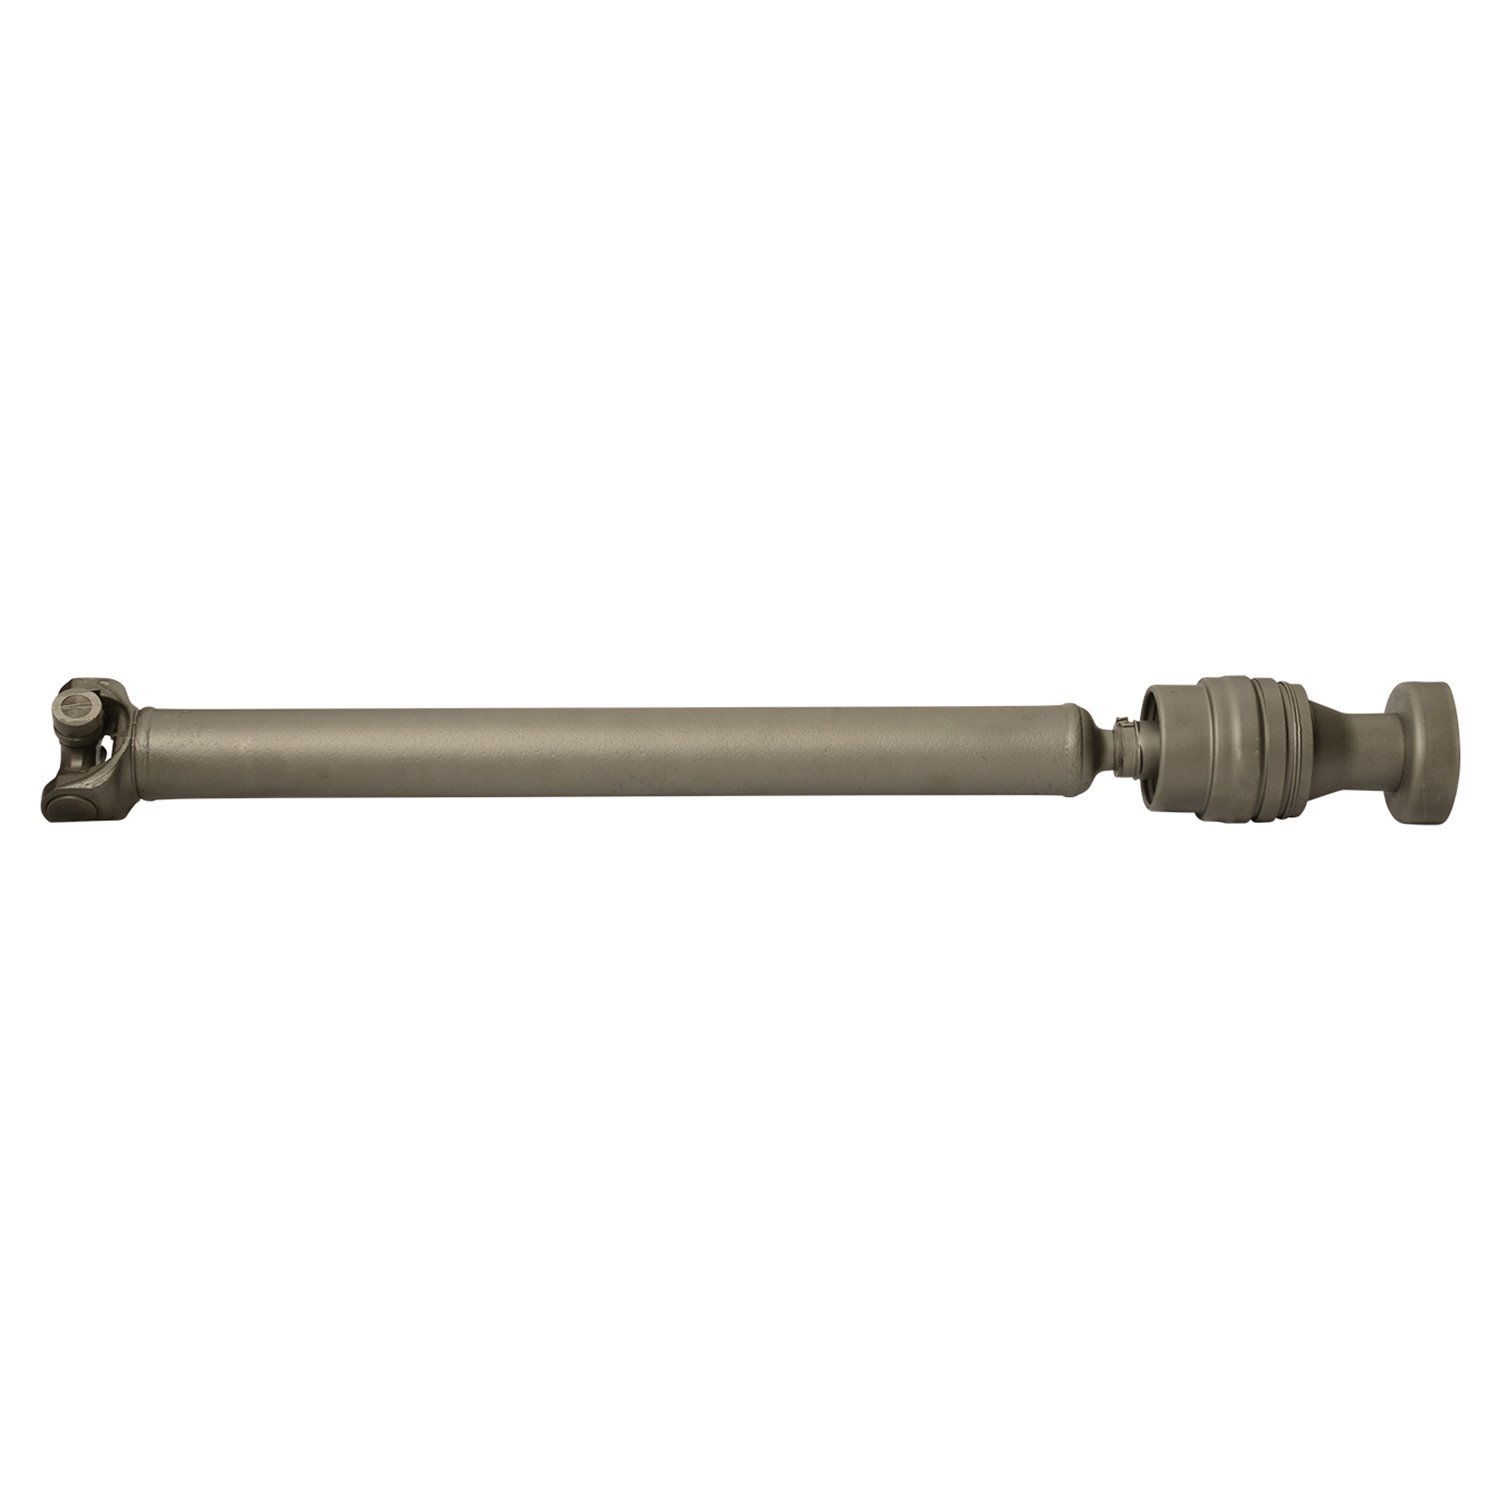 USA Standard ZDS9330 Front Driveshaft, For Buick Rainier, 26-1/2 in. Weld-To-Weld